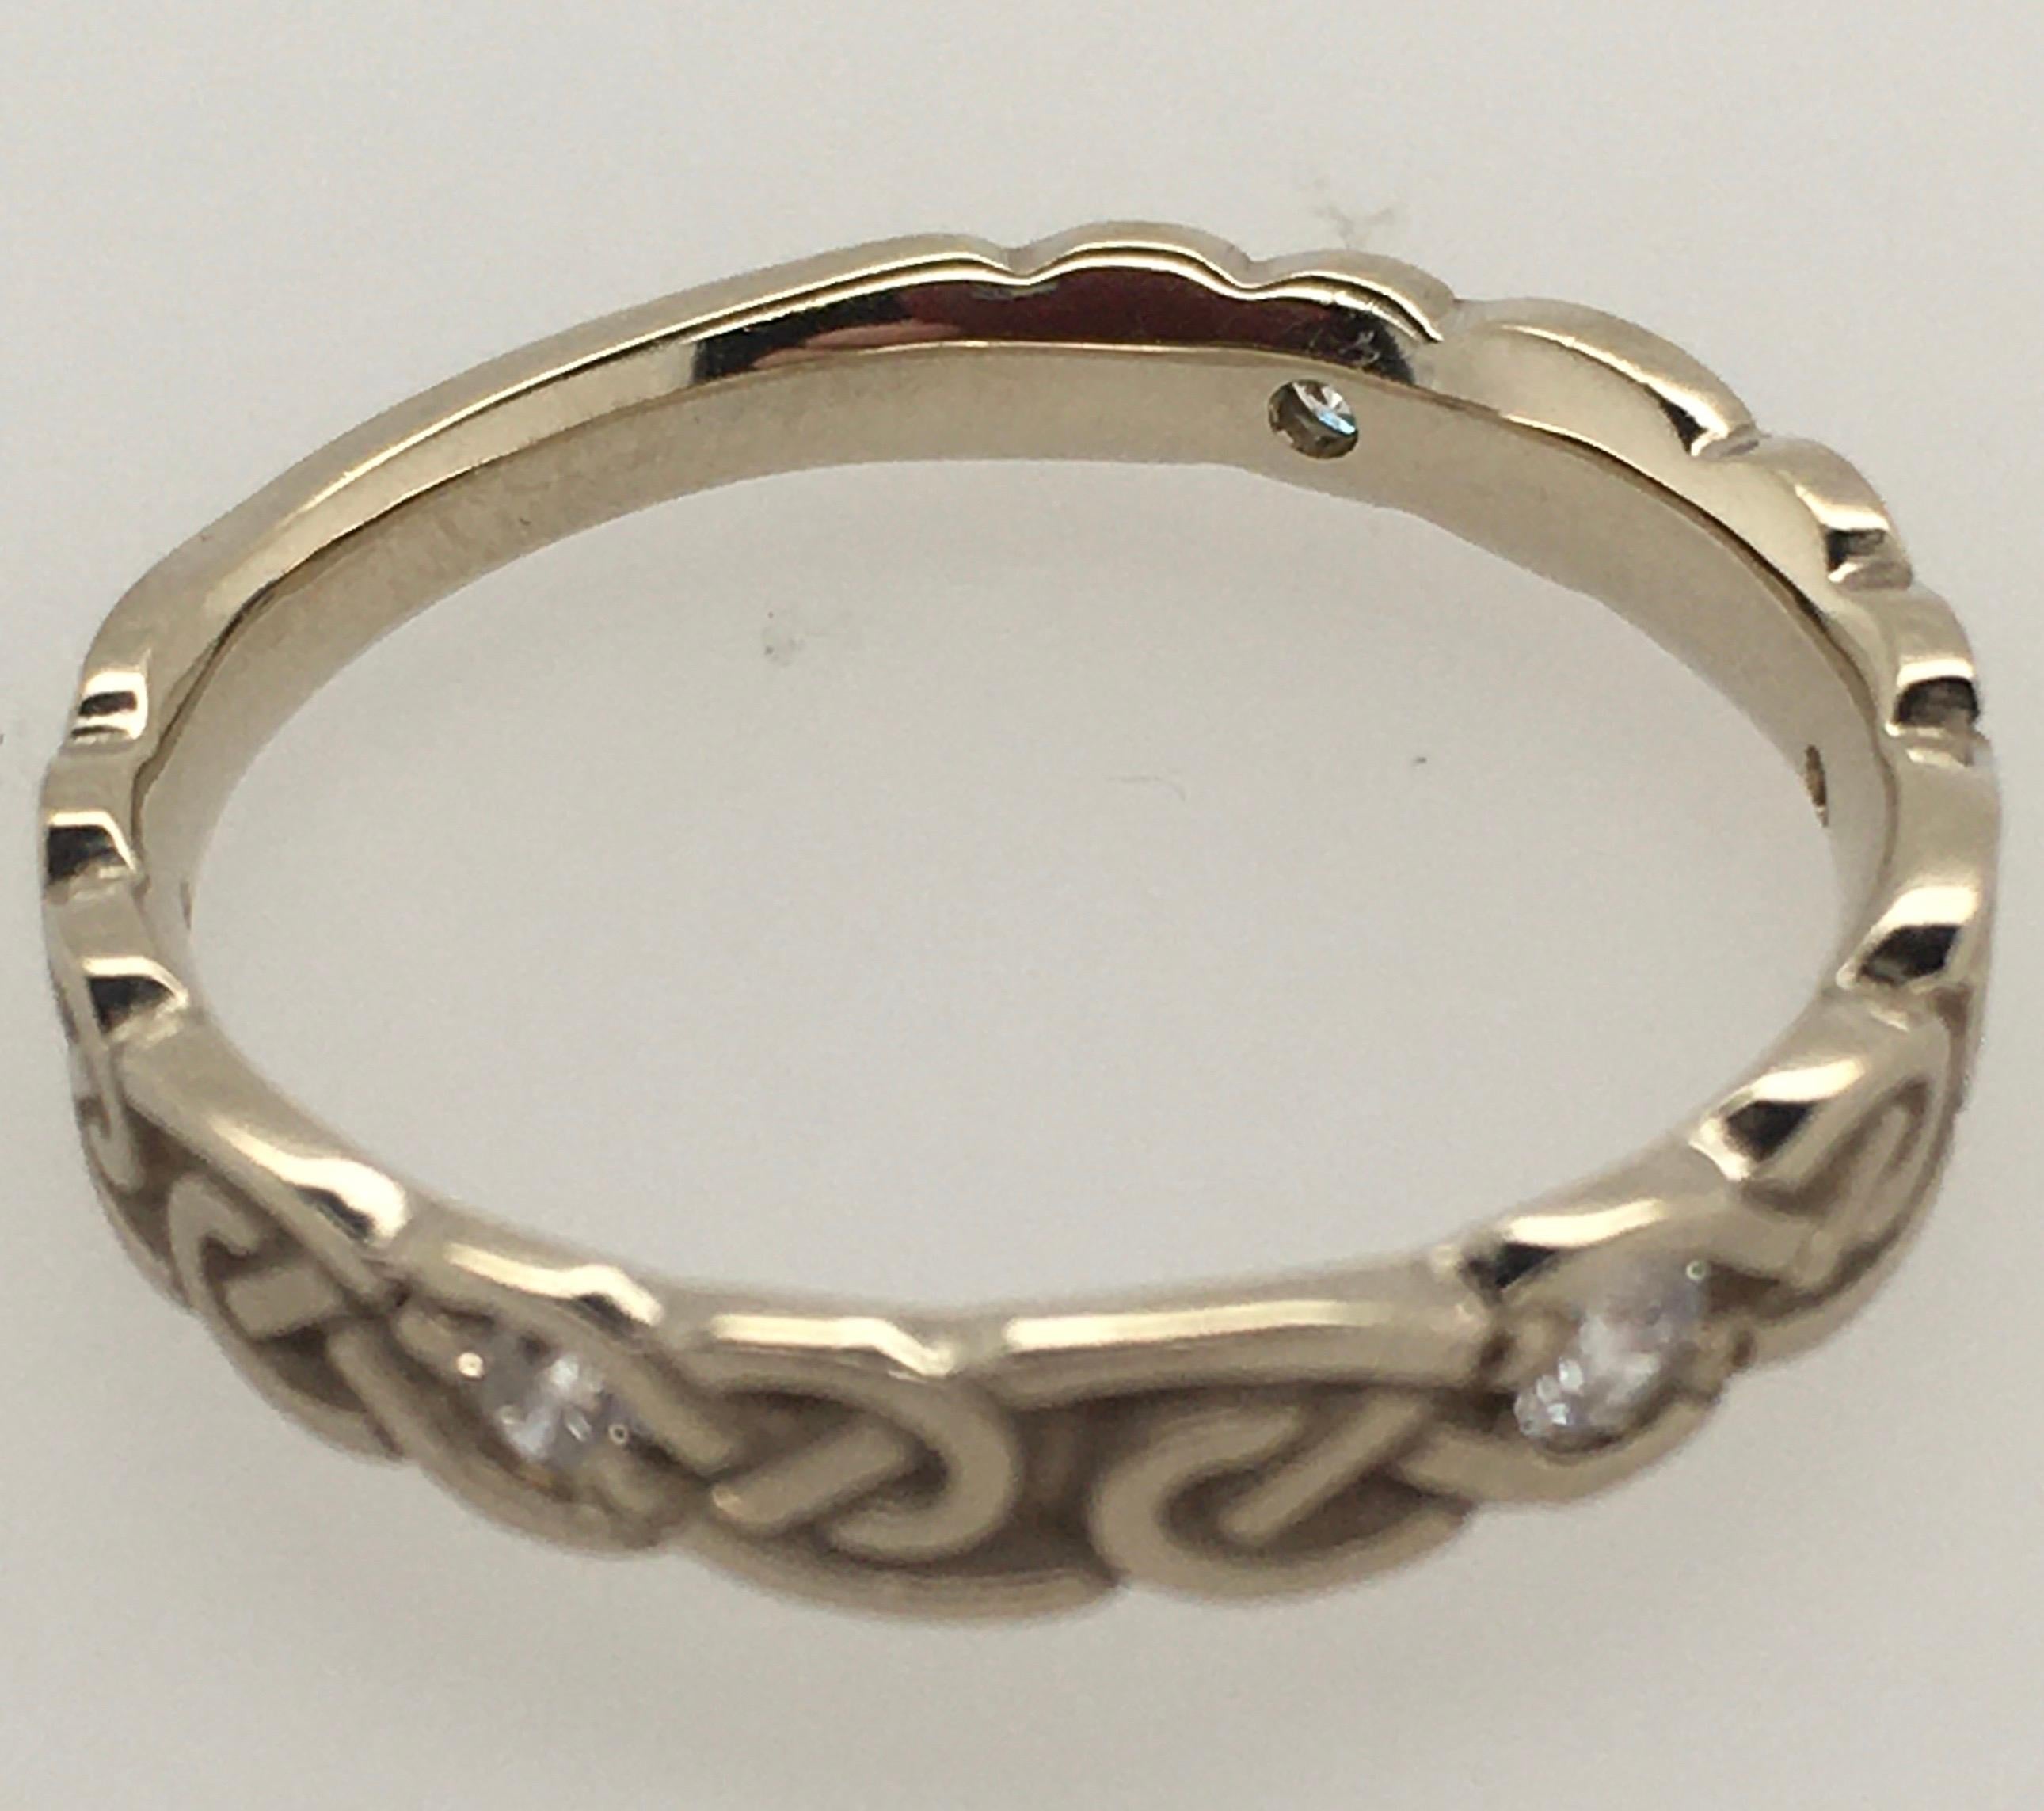 This Studio 311 women's 14K white gold band is a striking example of their Borderless Narrow Infinity Knot design. Light oxidation highlights its intricate detailing. The Comfort Fit band is set with 5 diamond accents (.18 TCW) within the infinity